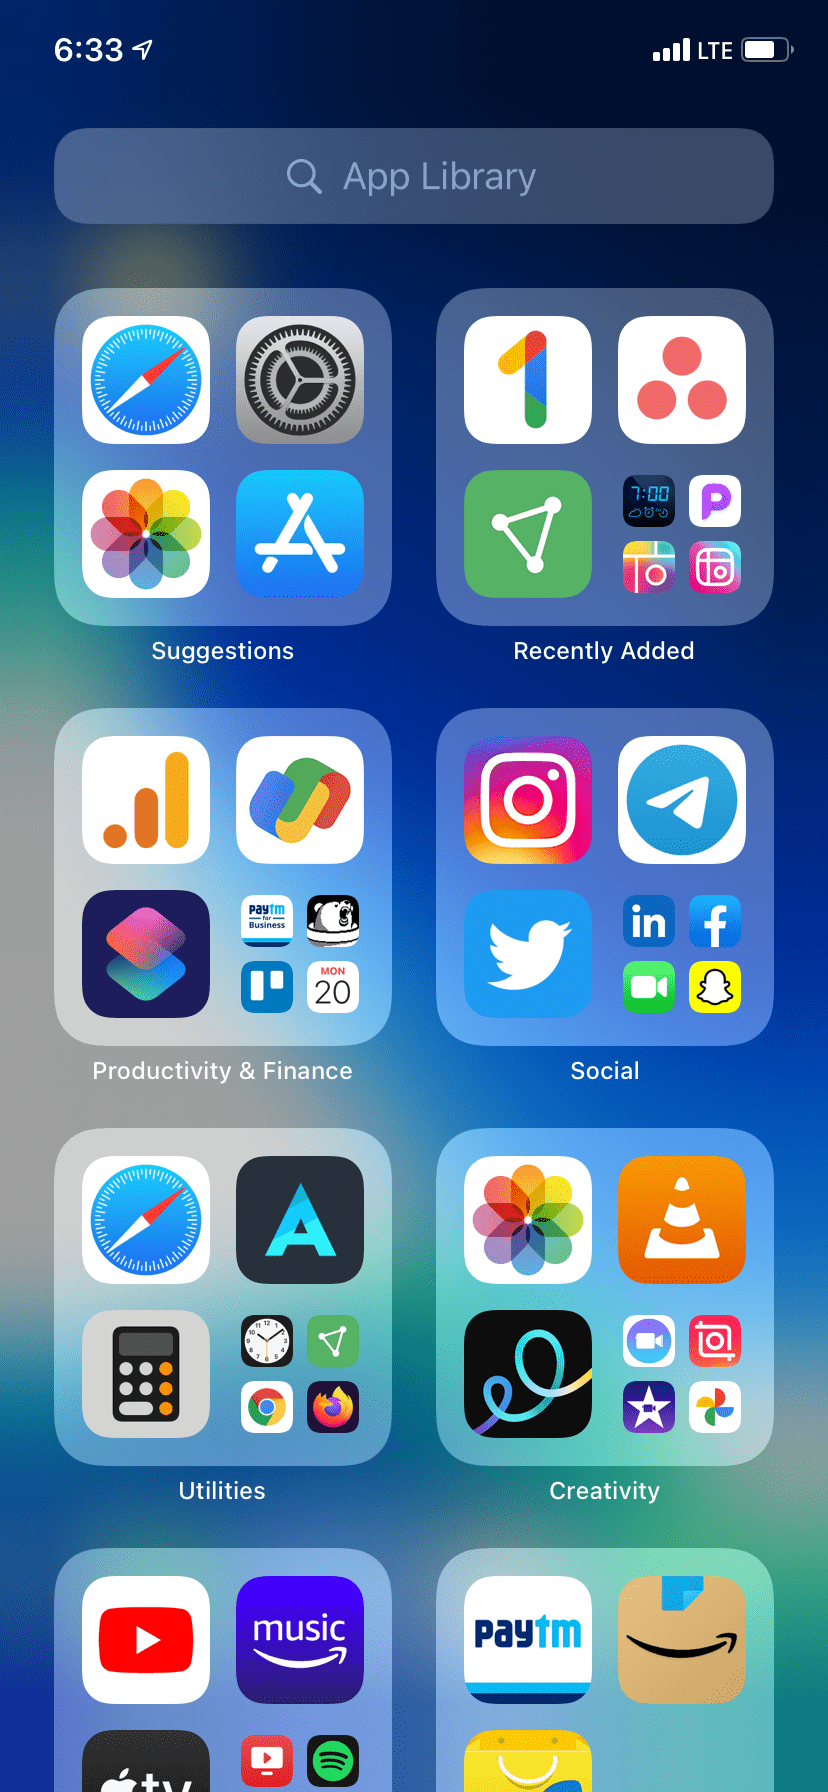 App Library on iPhone showing all apps in proper categories